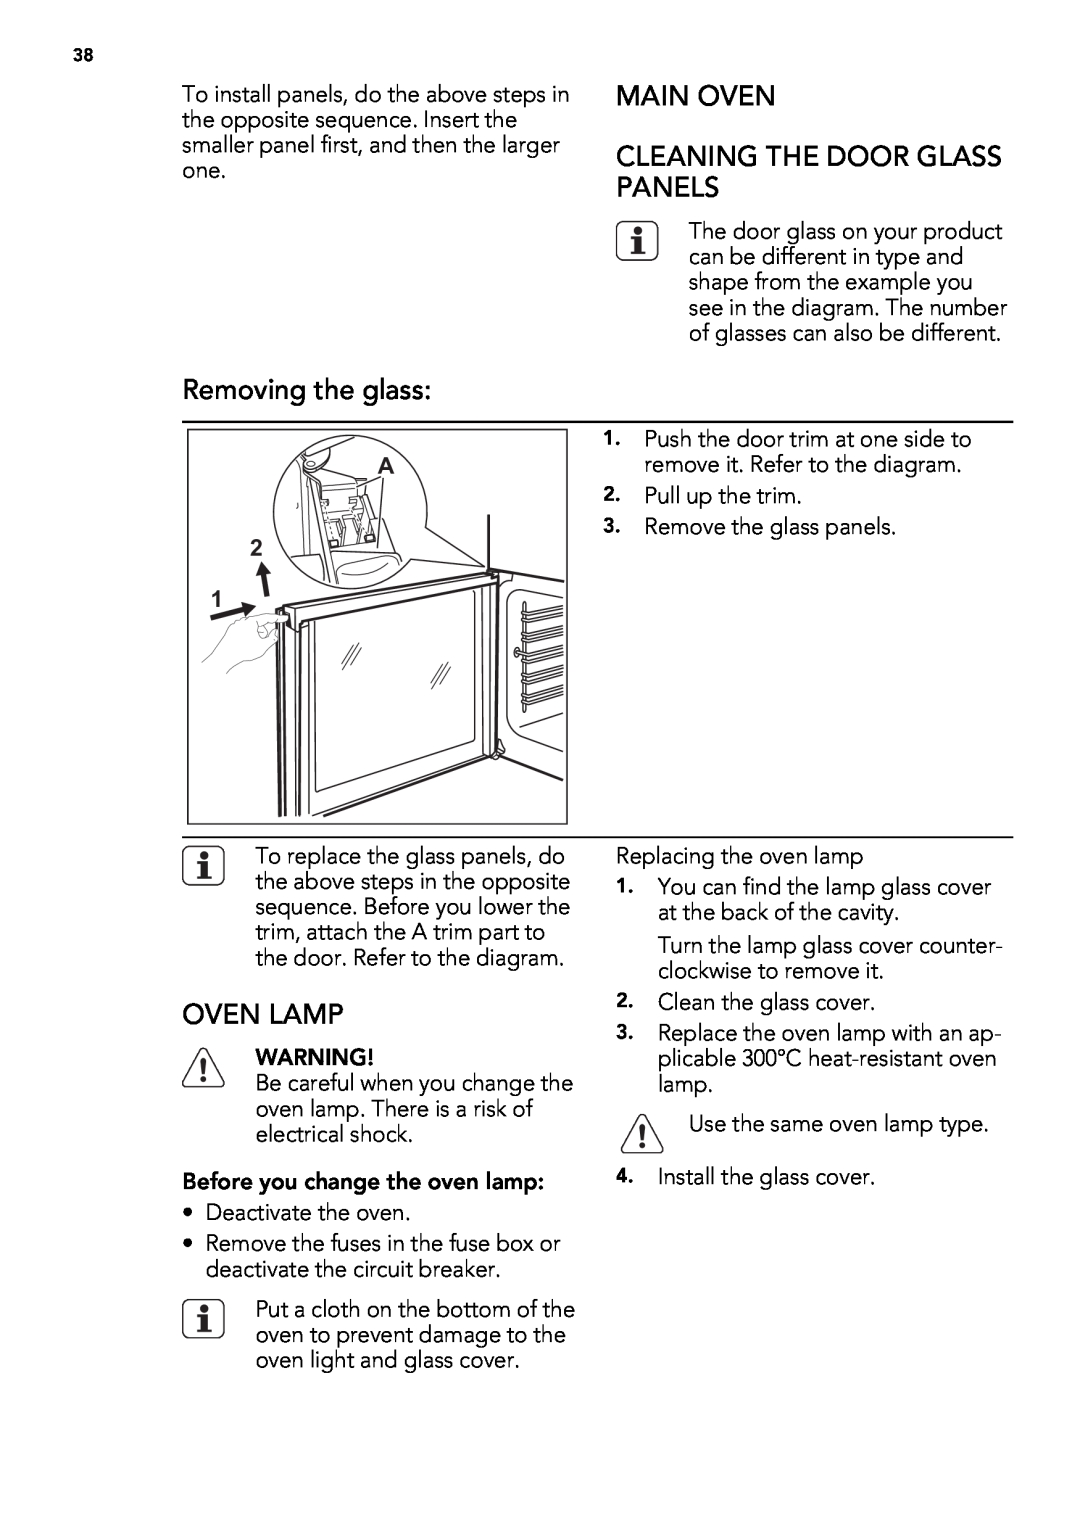 AEG 49332I-MN user manual Removing the glass, Main Oven Cleaning The Door Glass Panels, Oven Lamp 